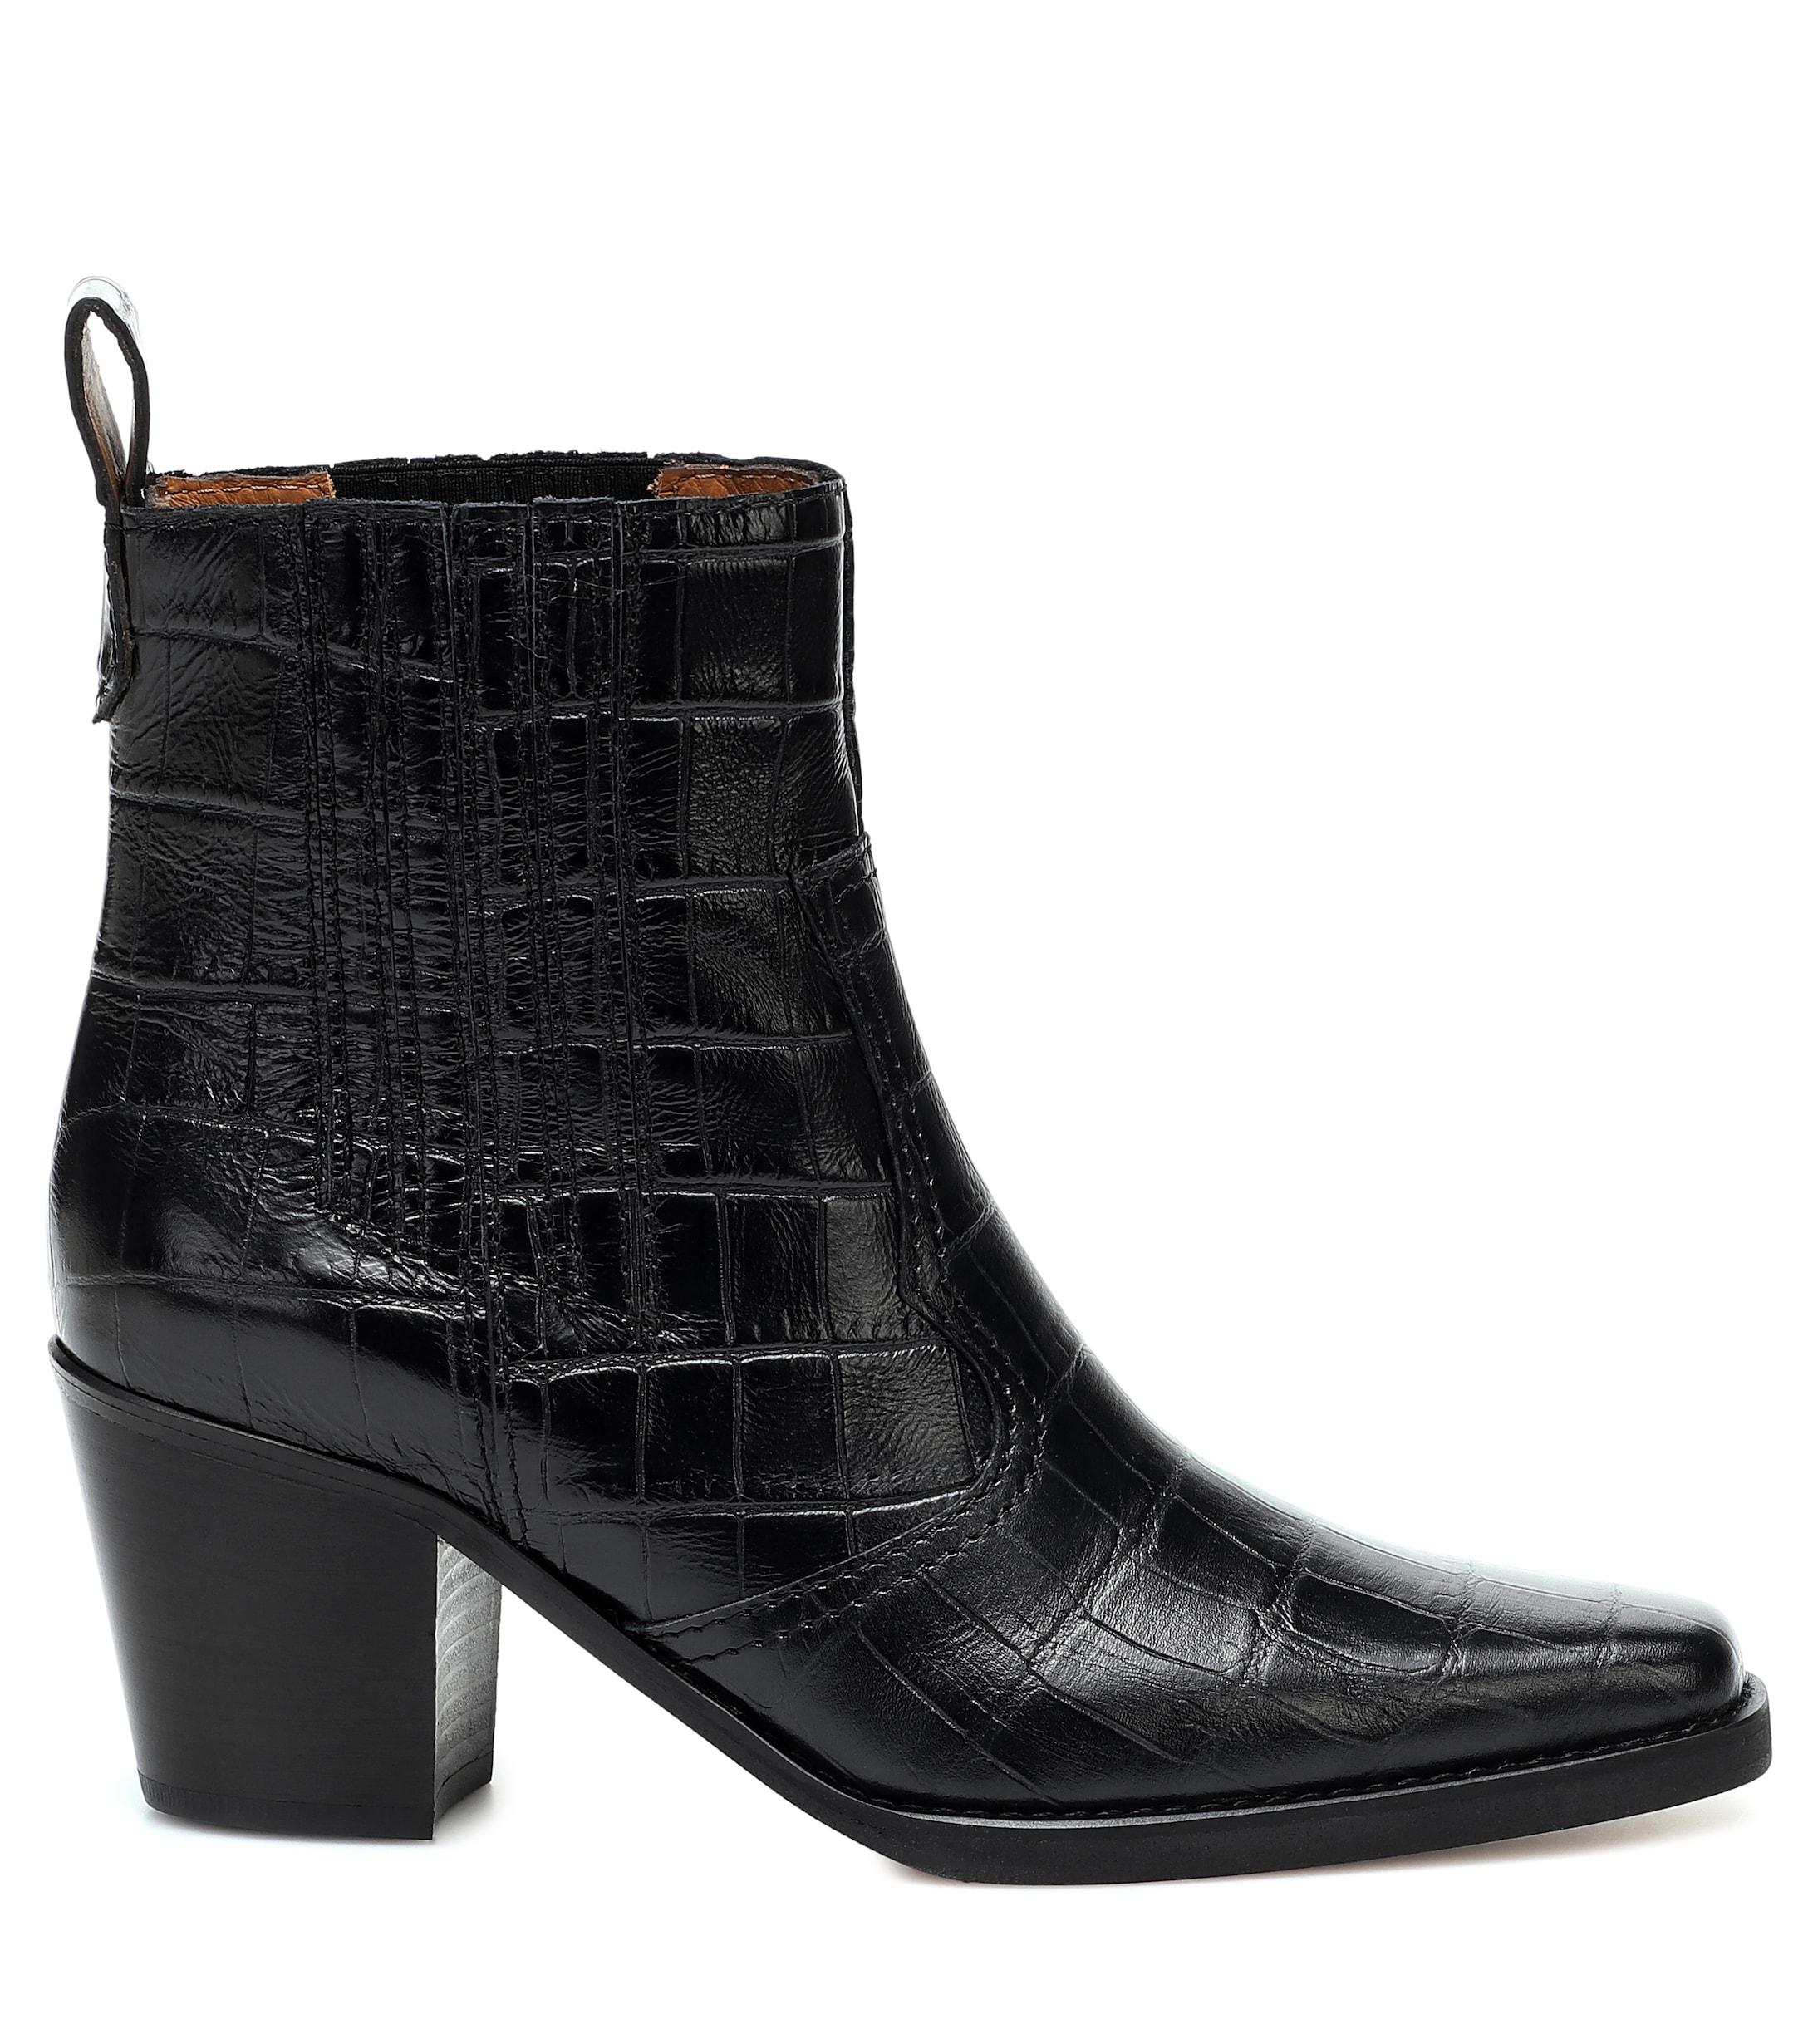 Ganni Western Leather Ankle Boots in Black - Lyst